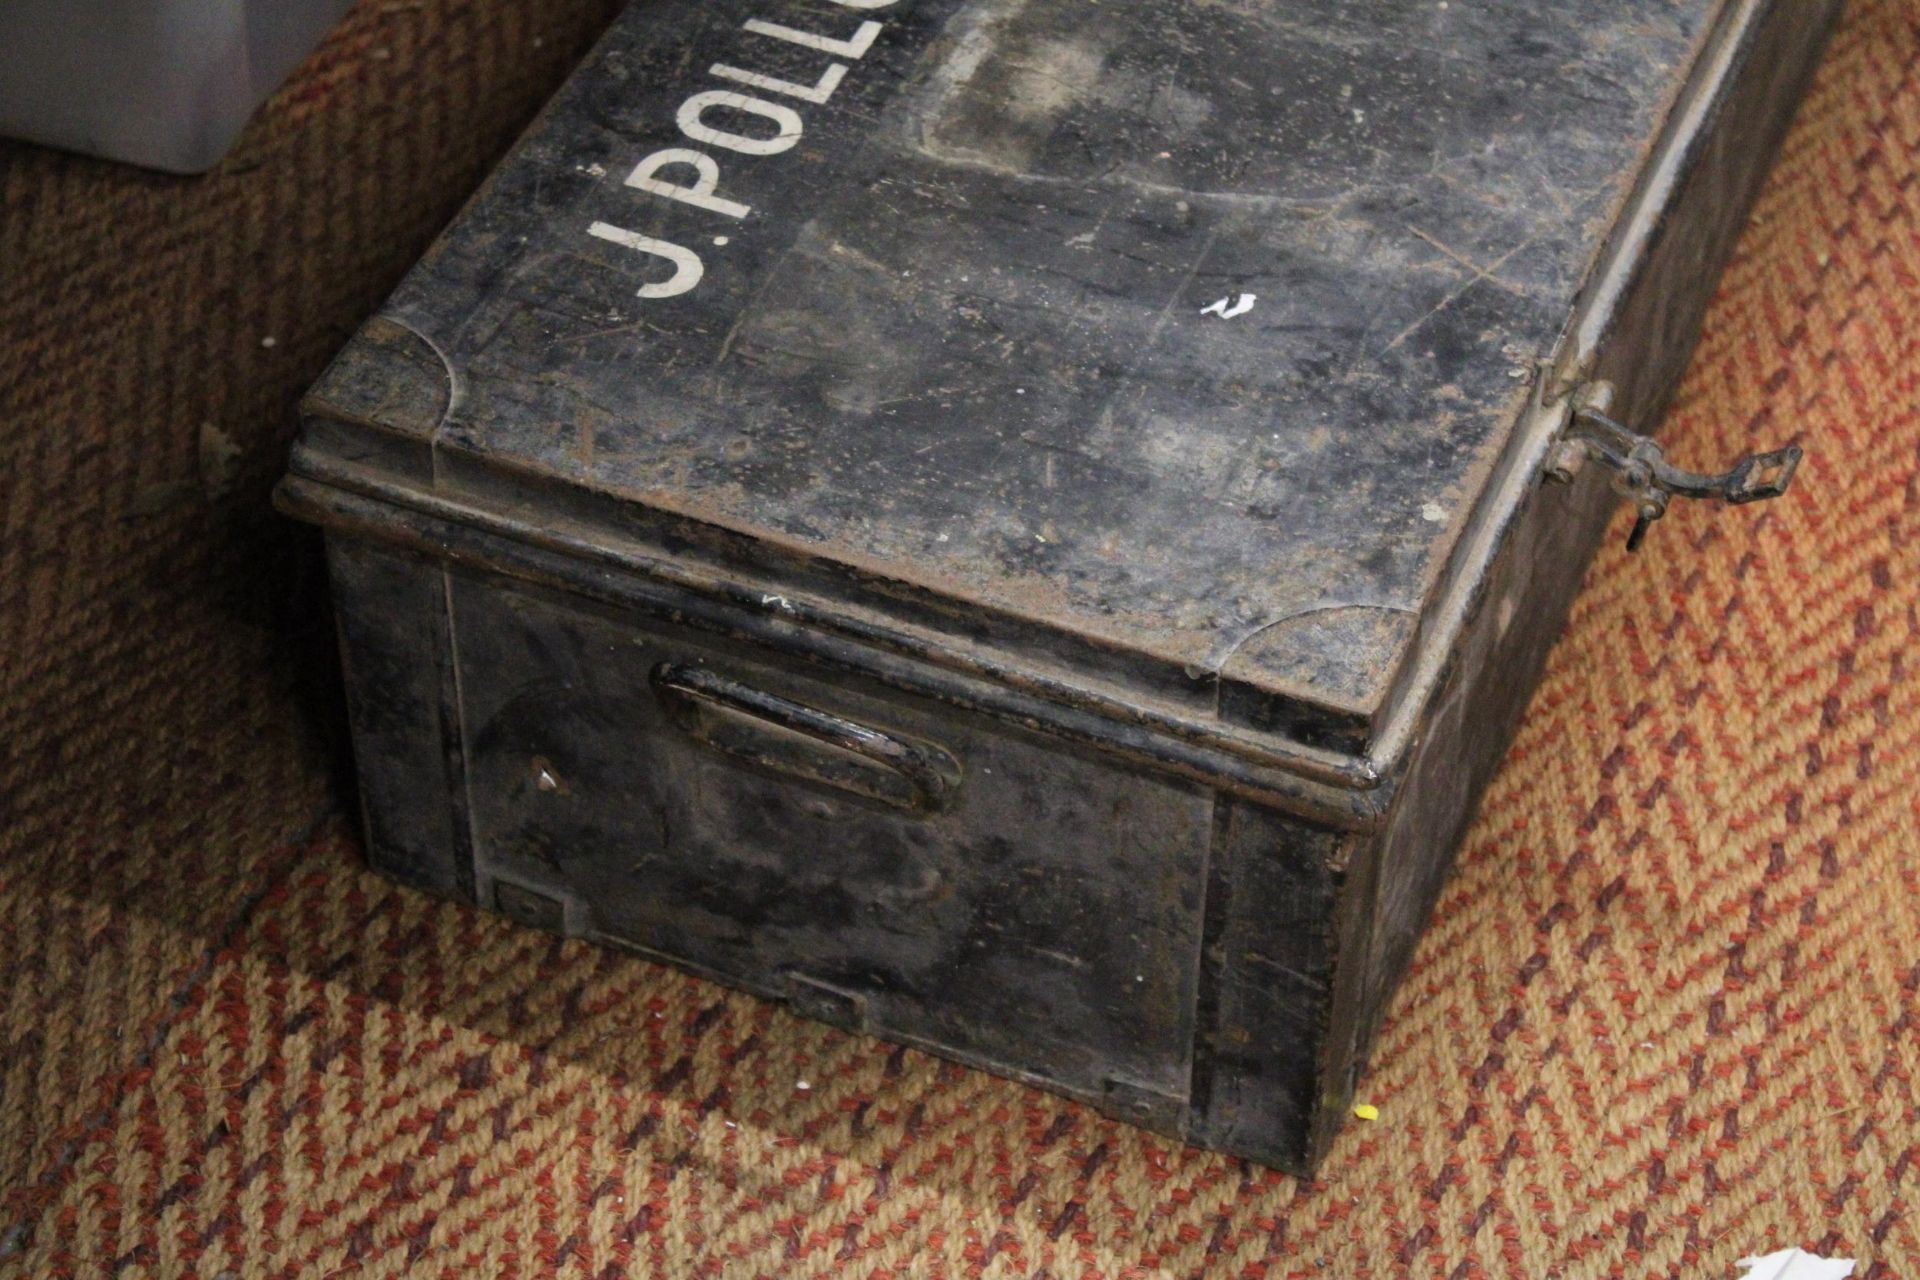 AN EXTRA LONG METAL, MILITARY, TRAVEL CHEST WITH HANDLES AND LOCKS, LENGTH 106CM, HEIGHT 16CM, DEPTH - Image 2 of 3